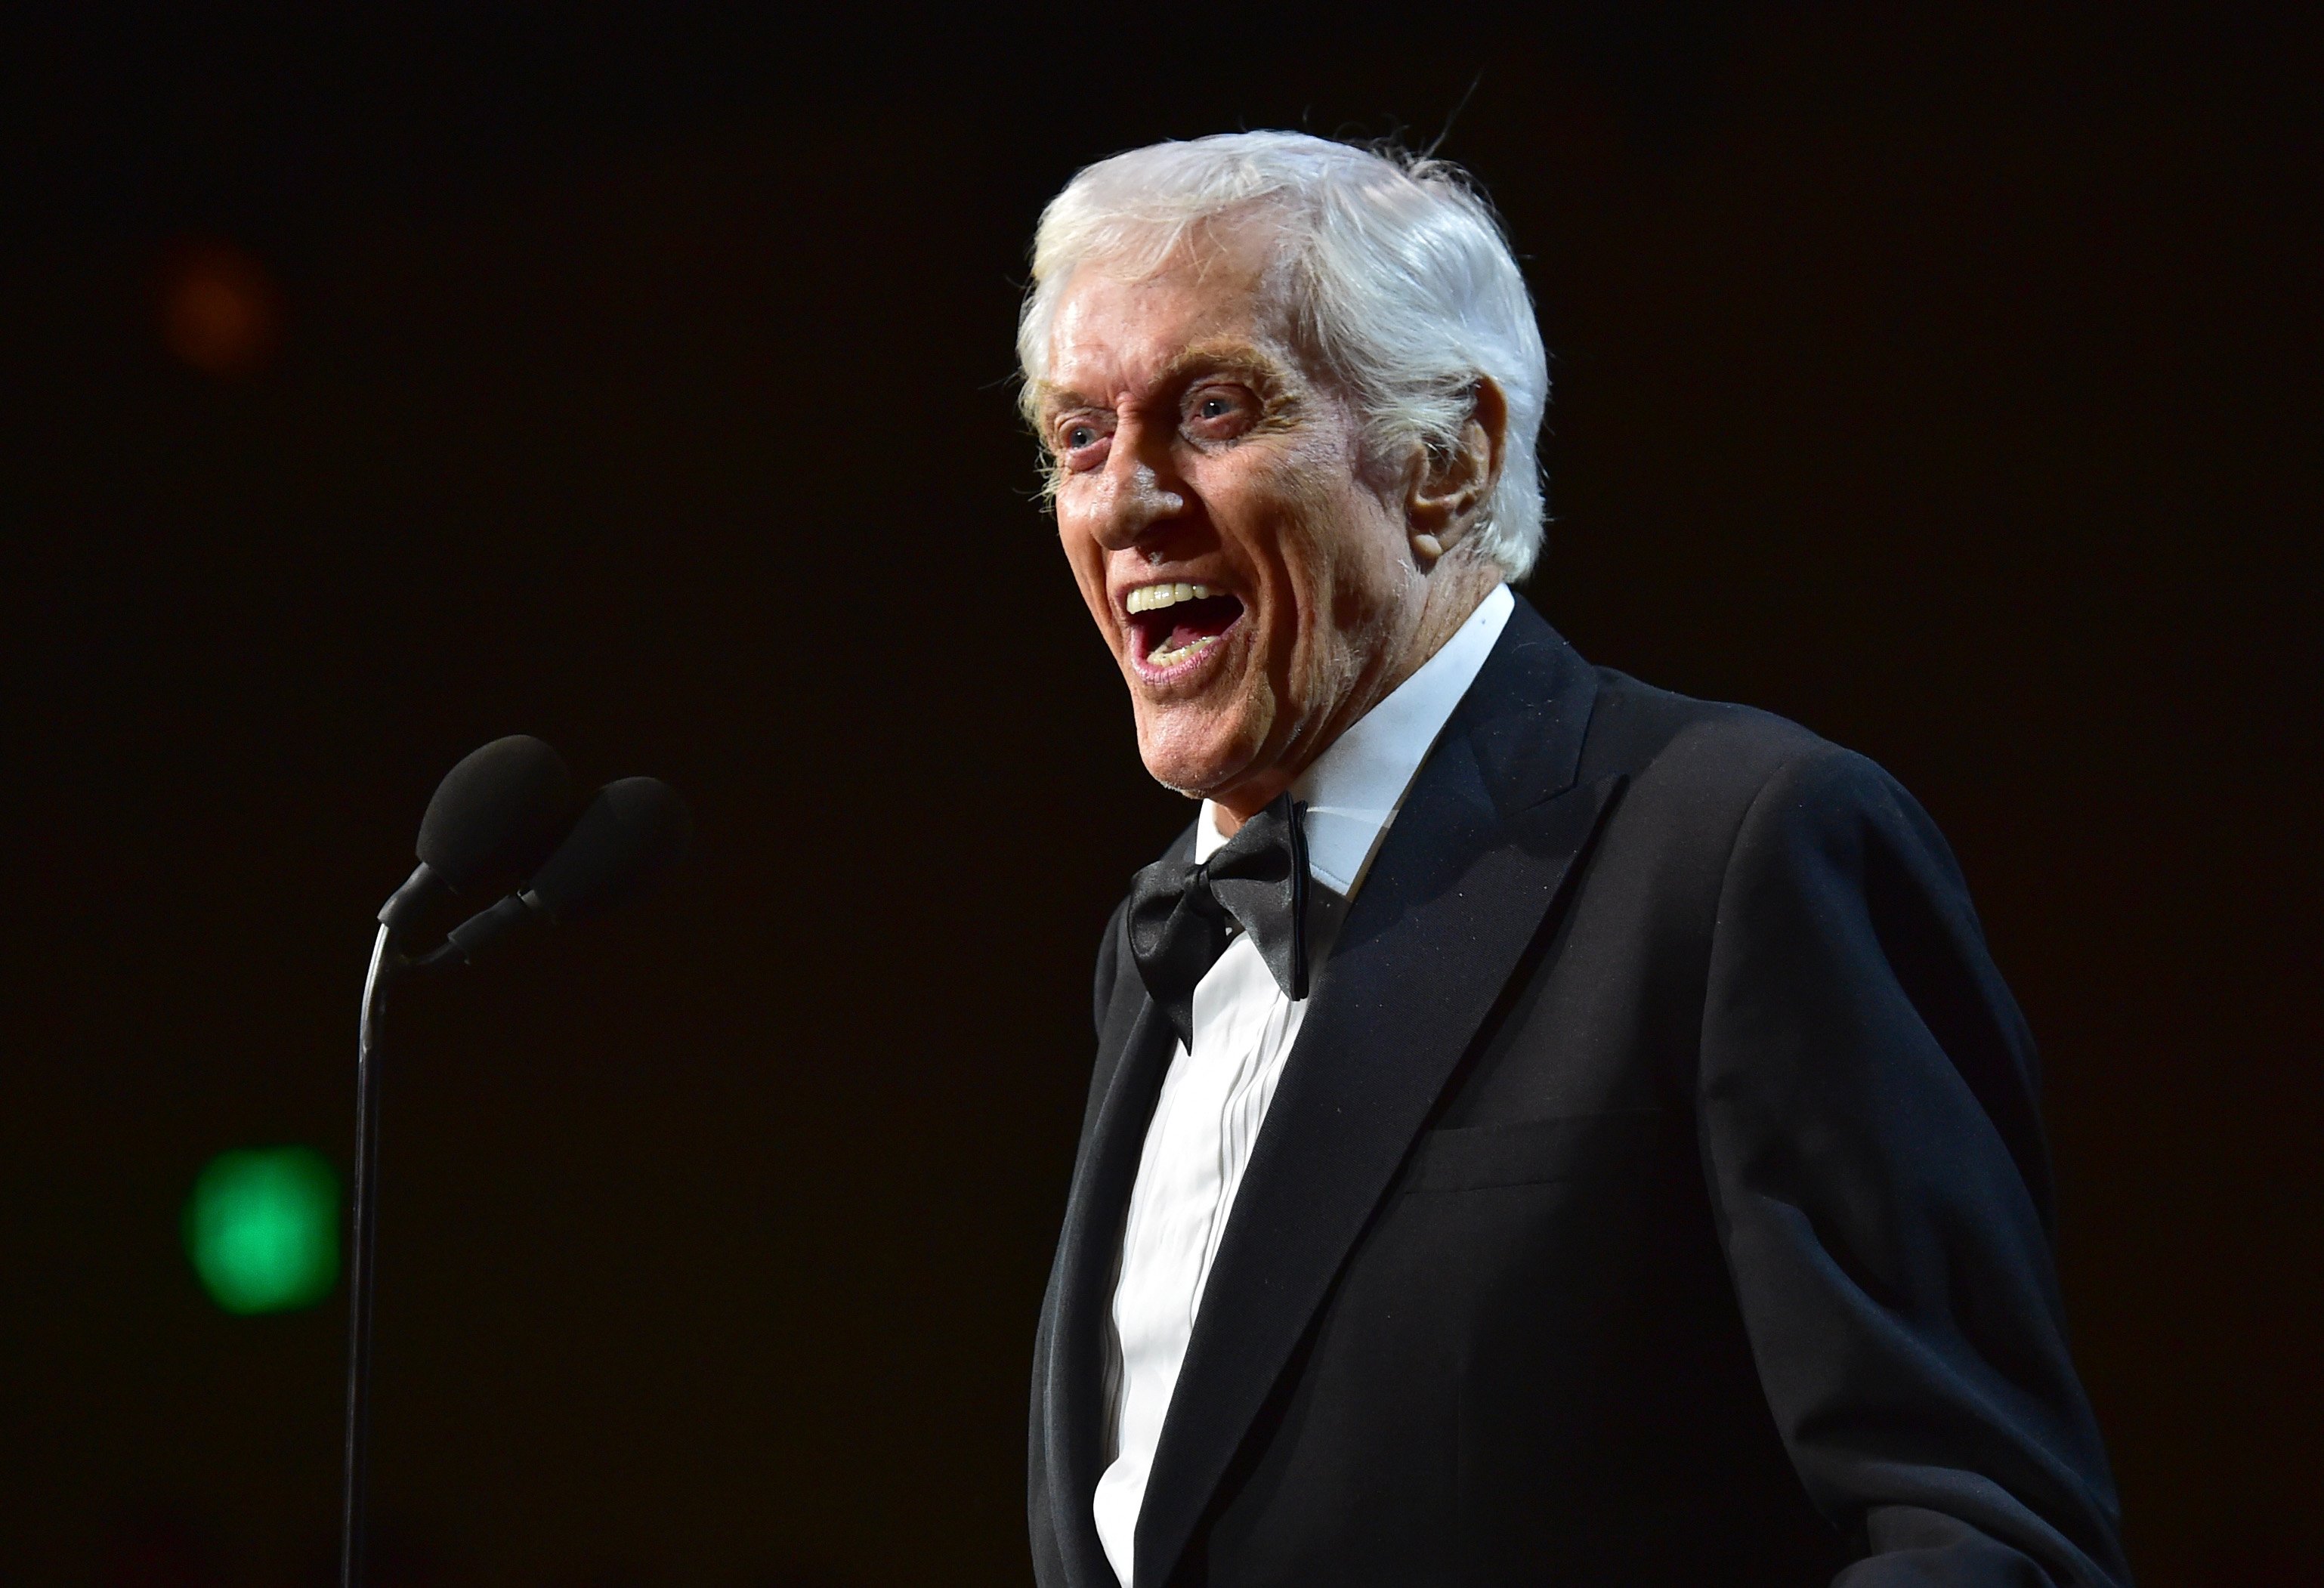 Dick Van Dyke attends the AMD British Academy Britannia Awards in Beverly Hills, California on October 27, 2017 | Photo: Getty Images